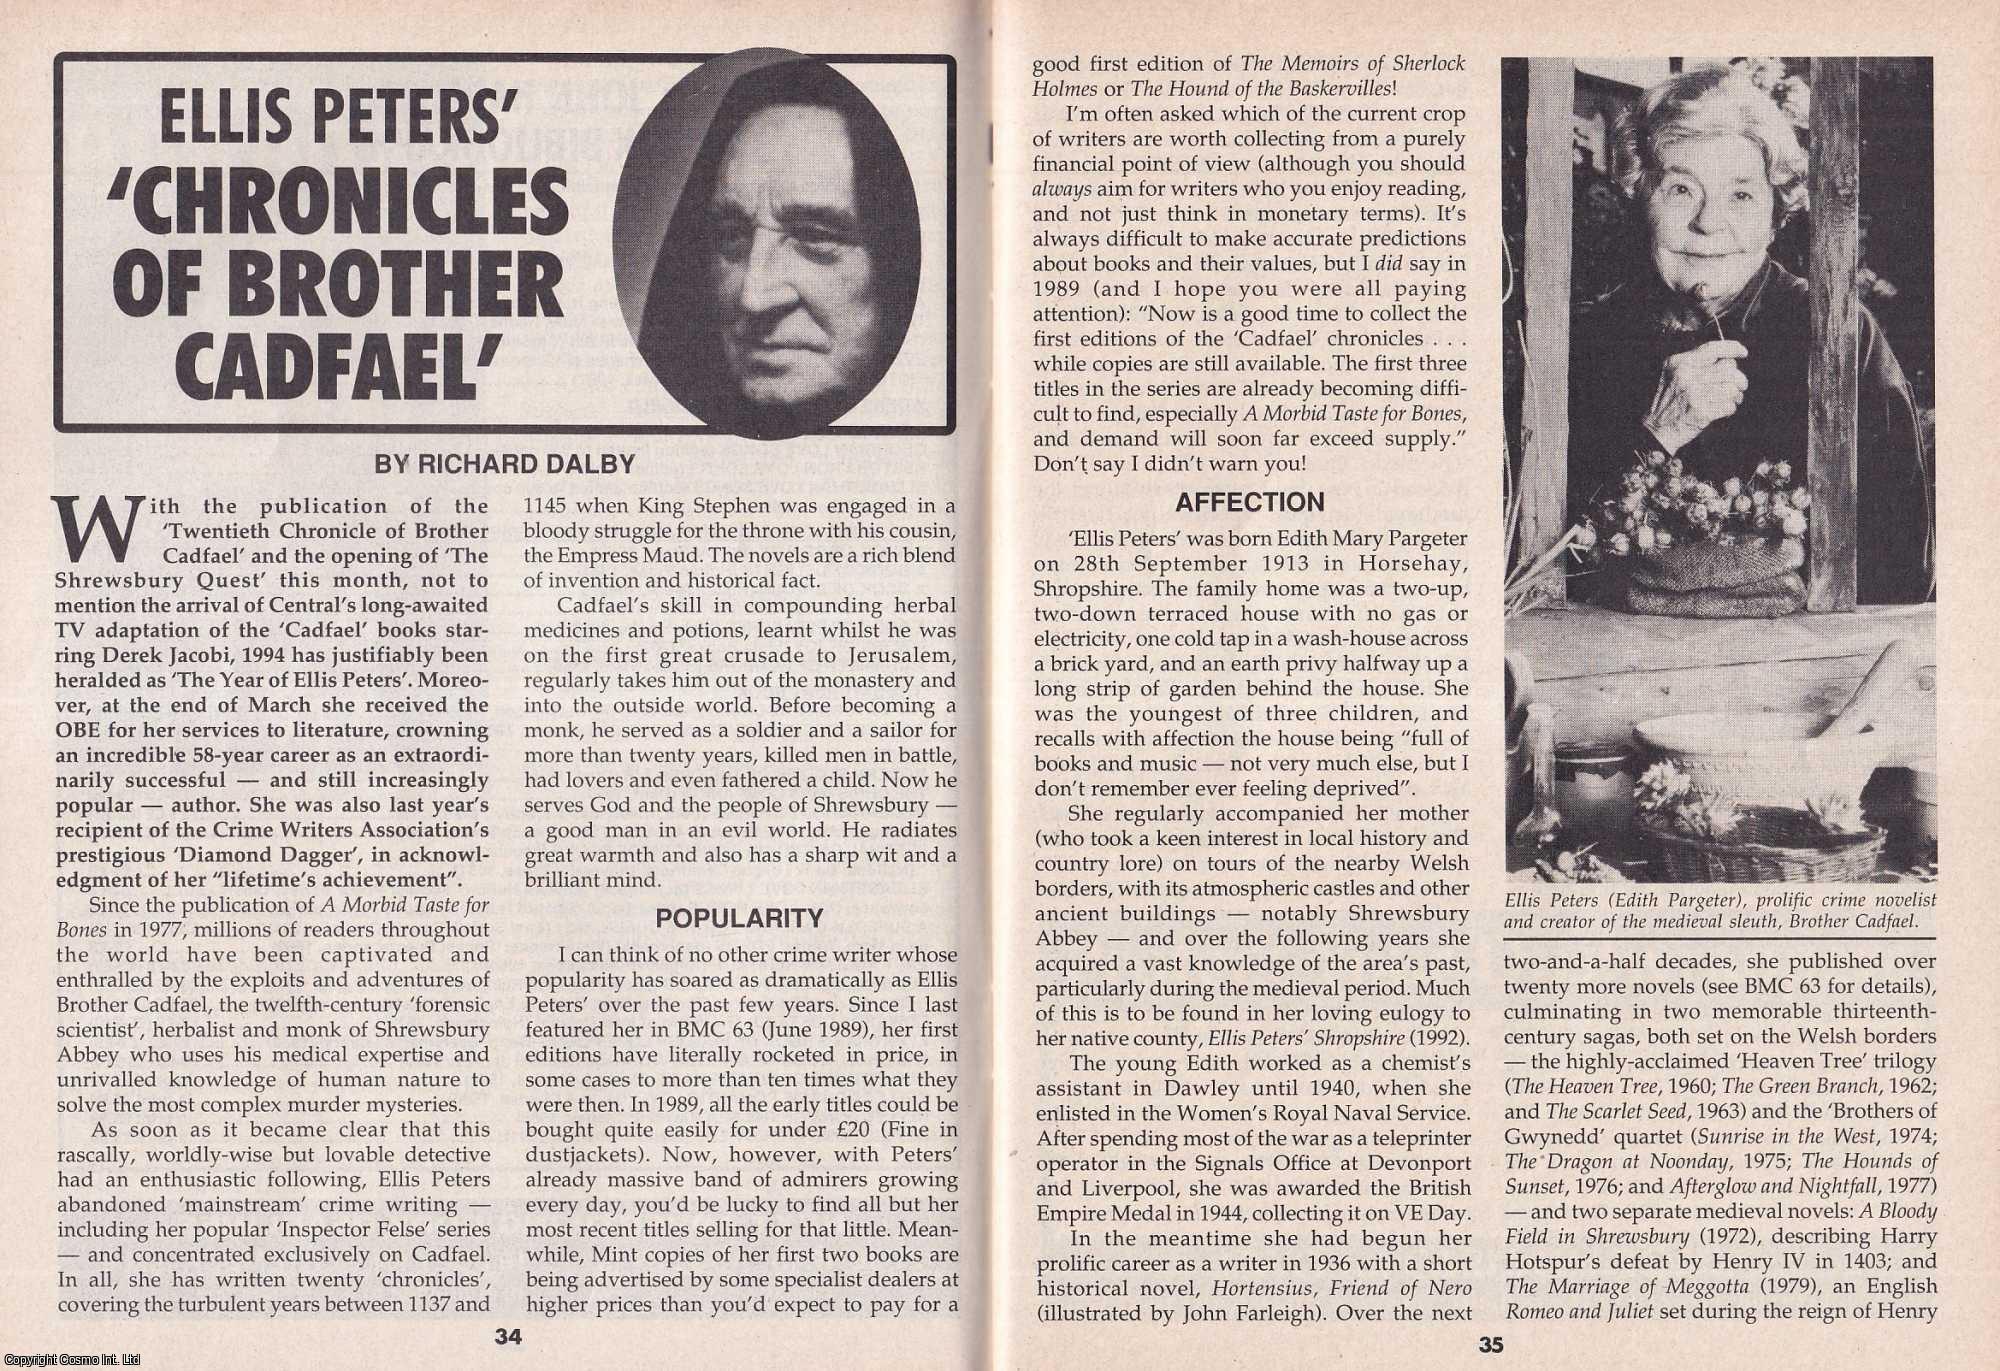 Richard Dalby - Ellis Peters' Chronicles of Brother Cadfael. This is an original article separated from an issue of The Book & Magazine Collector publication.